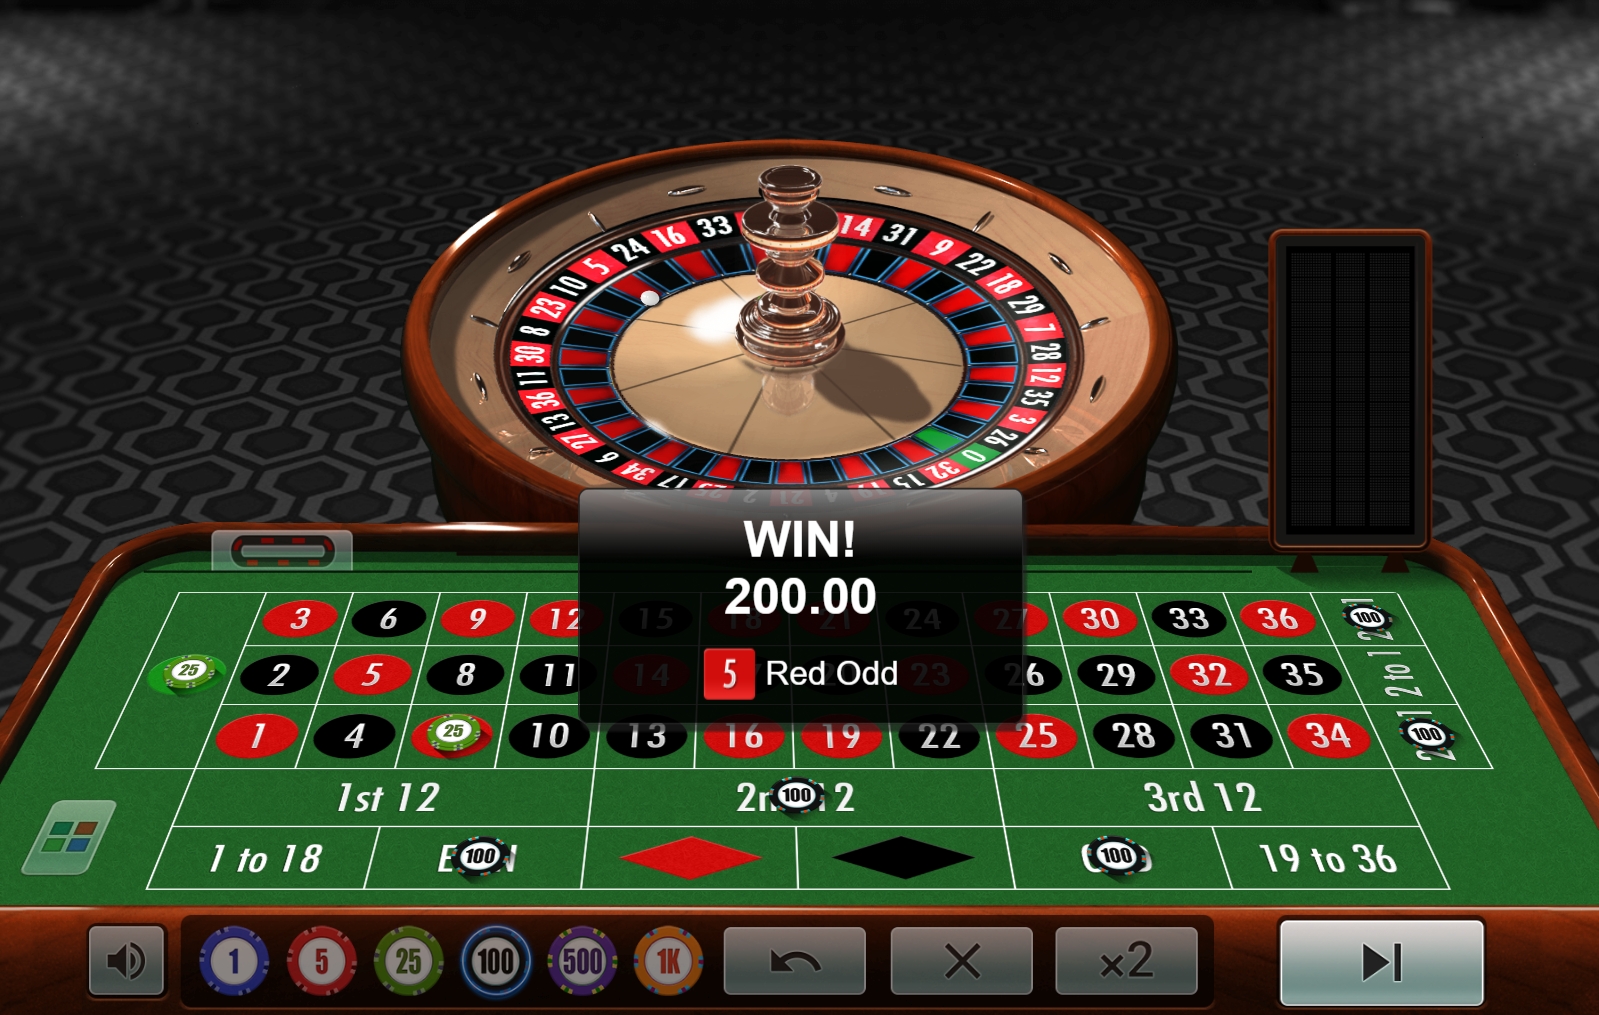 how to win in roulette online casino?